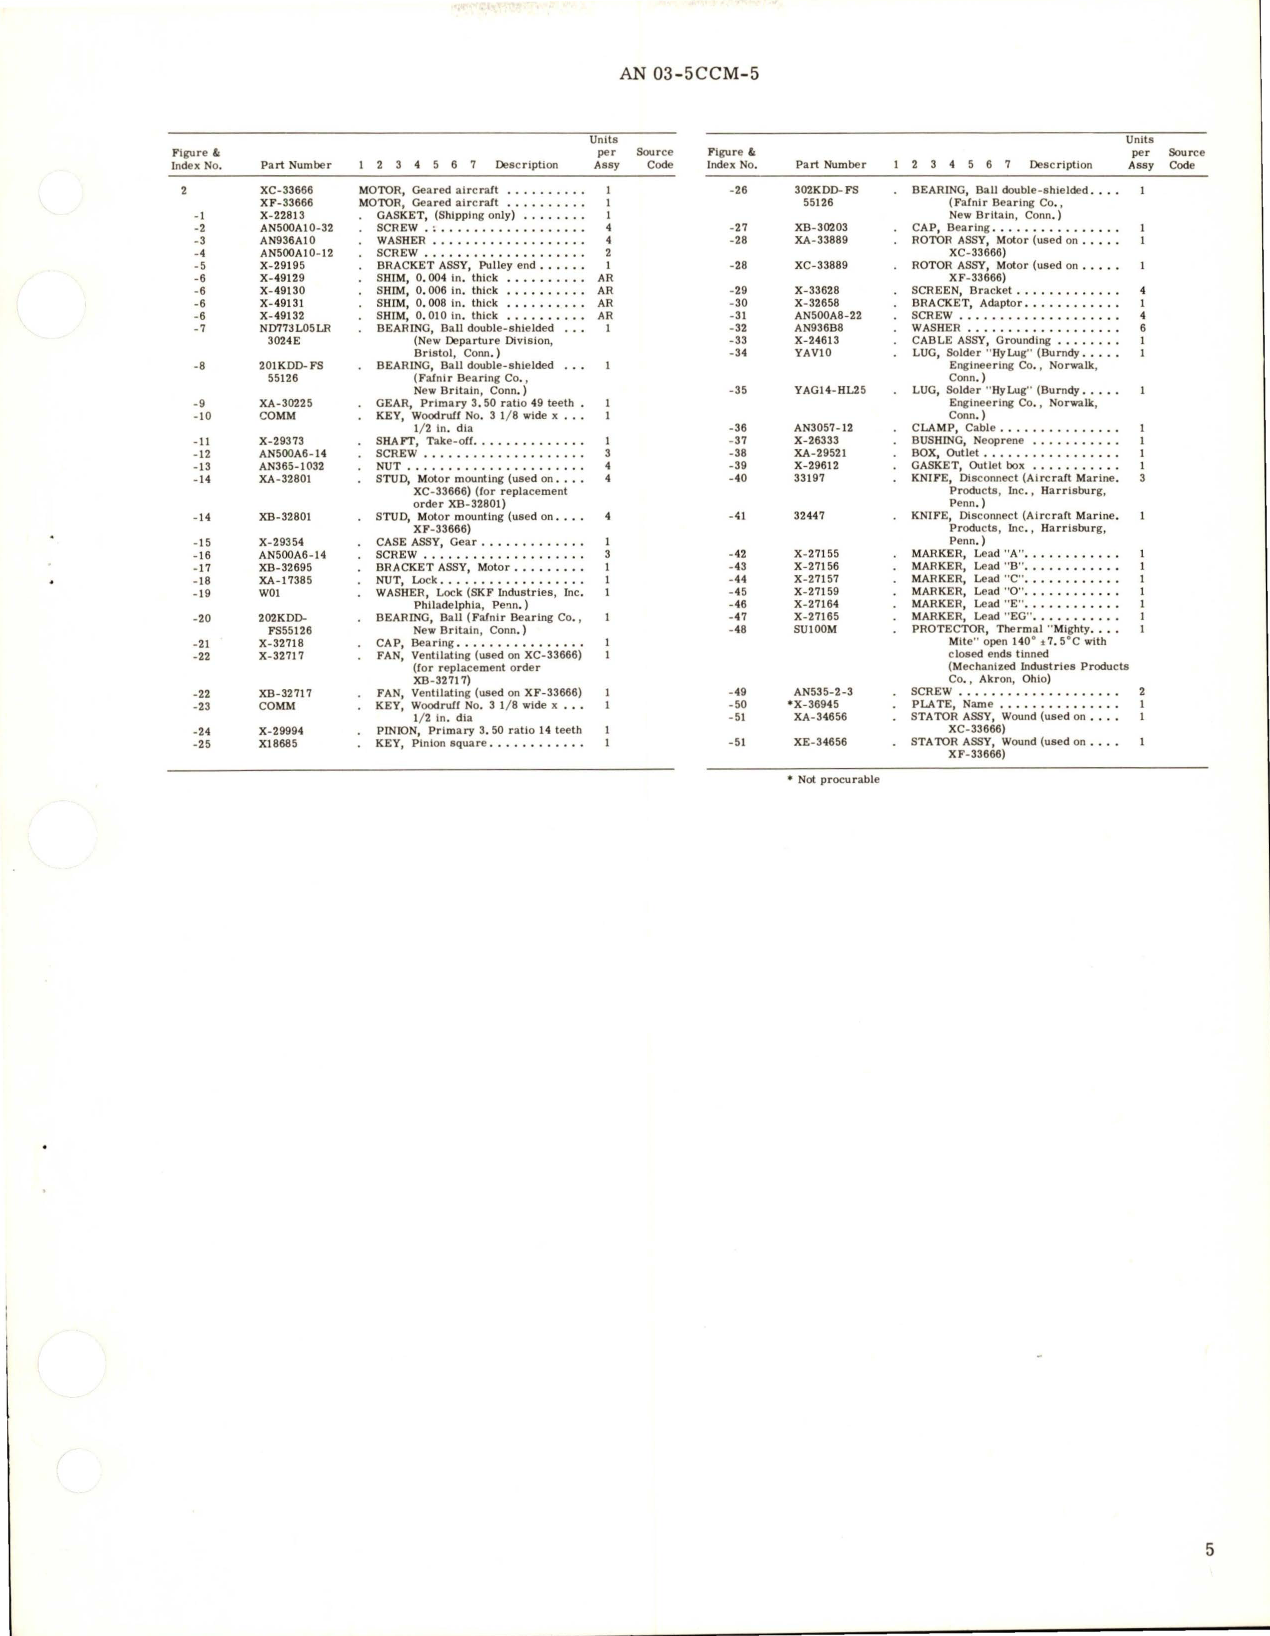 Sample page 5 from AirCorps Library document: Overhaul Instructions with Parts Breakdown for Geared Aircraft Motors - Parts XC-33666 and XF-33666